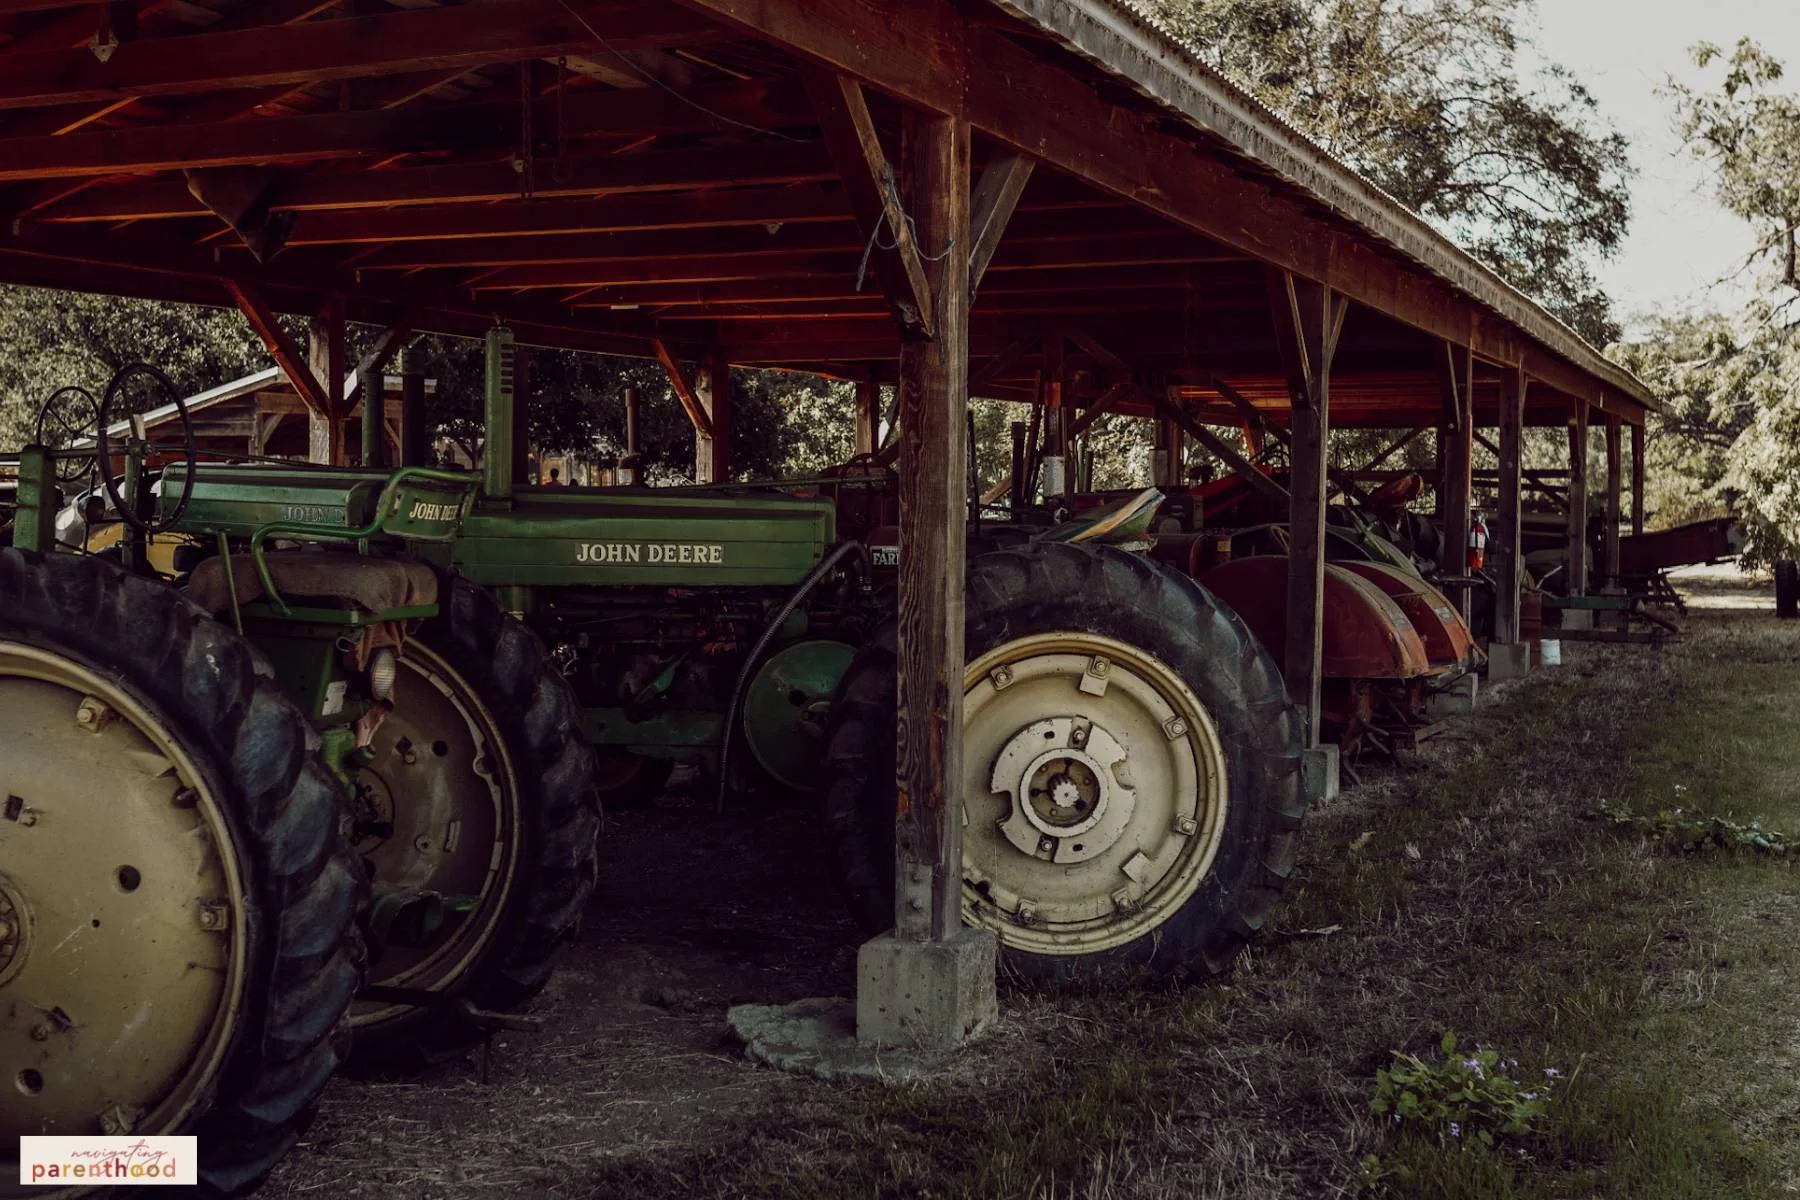 Image of tractors lined up under a shelter